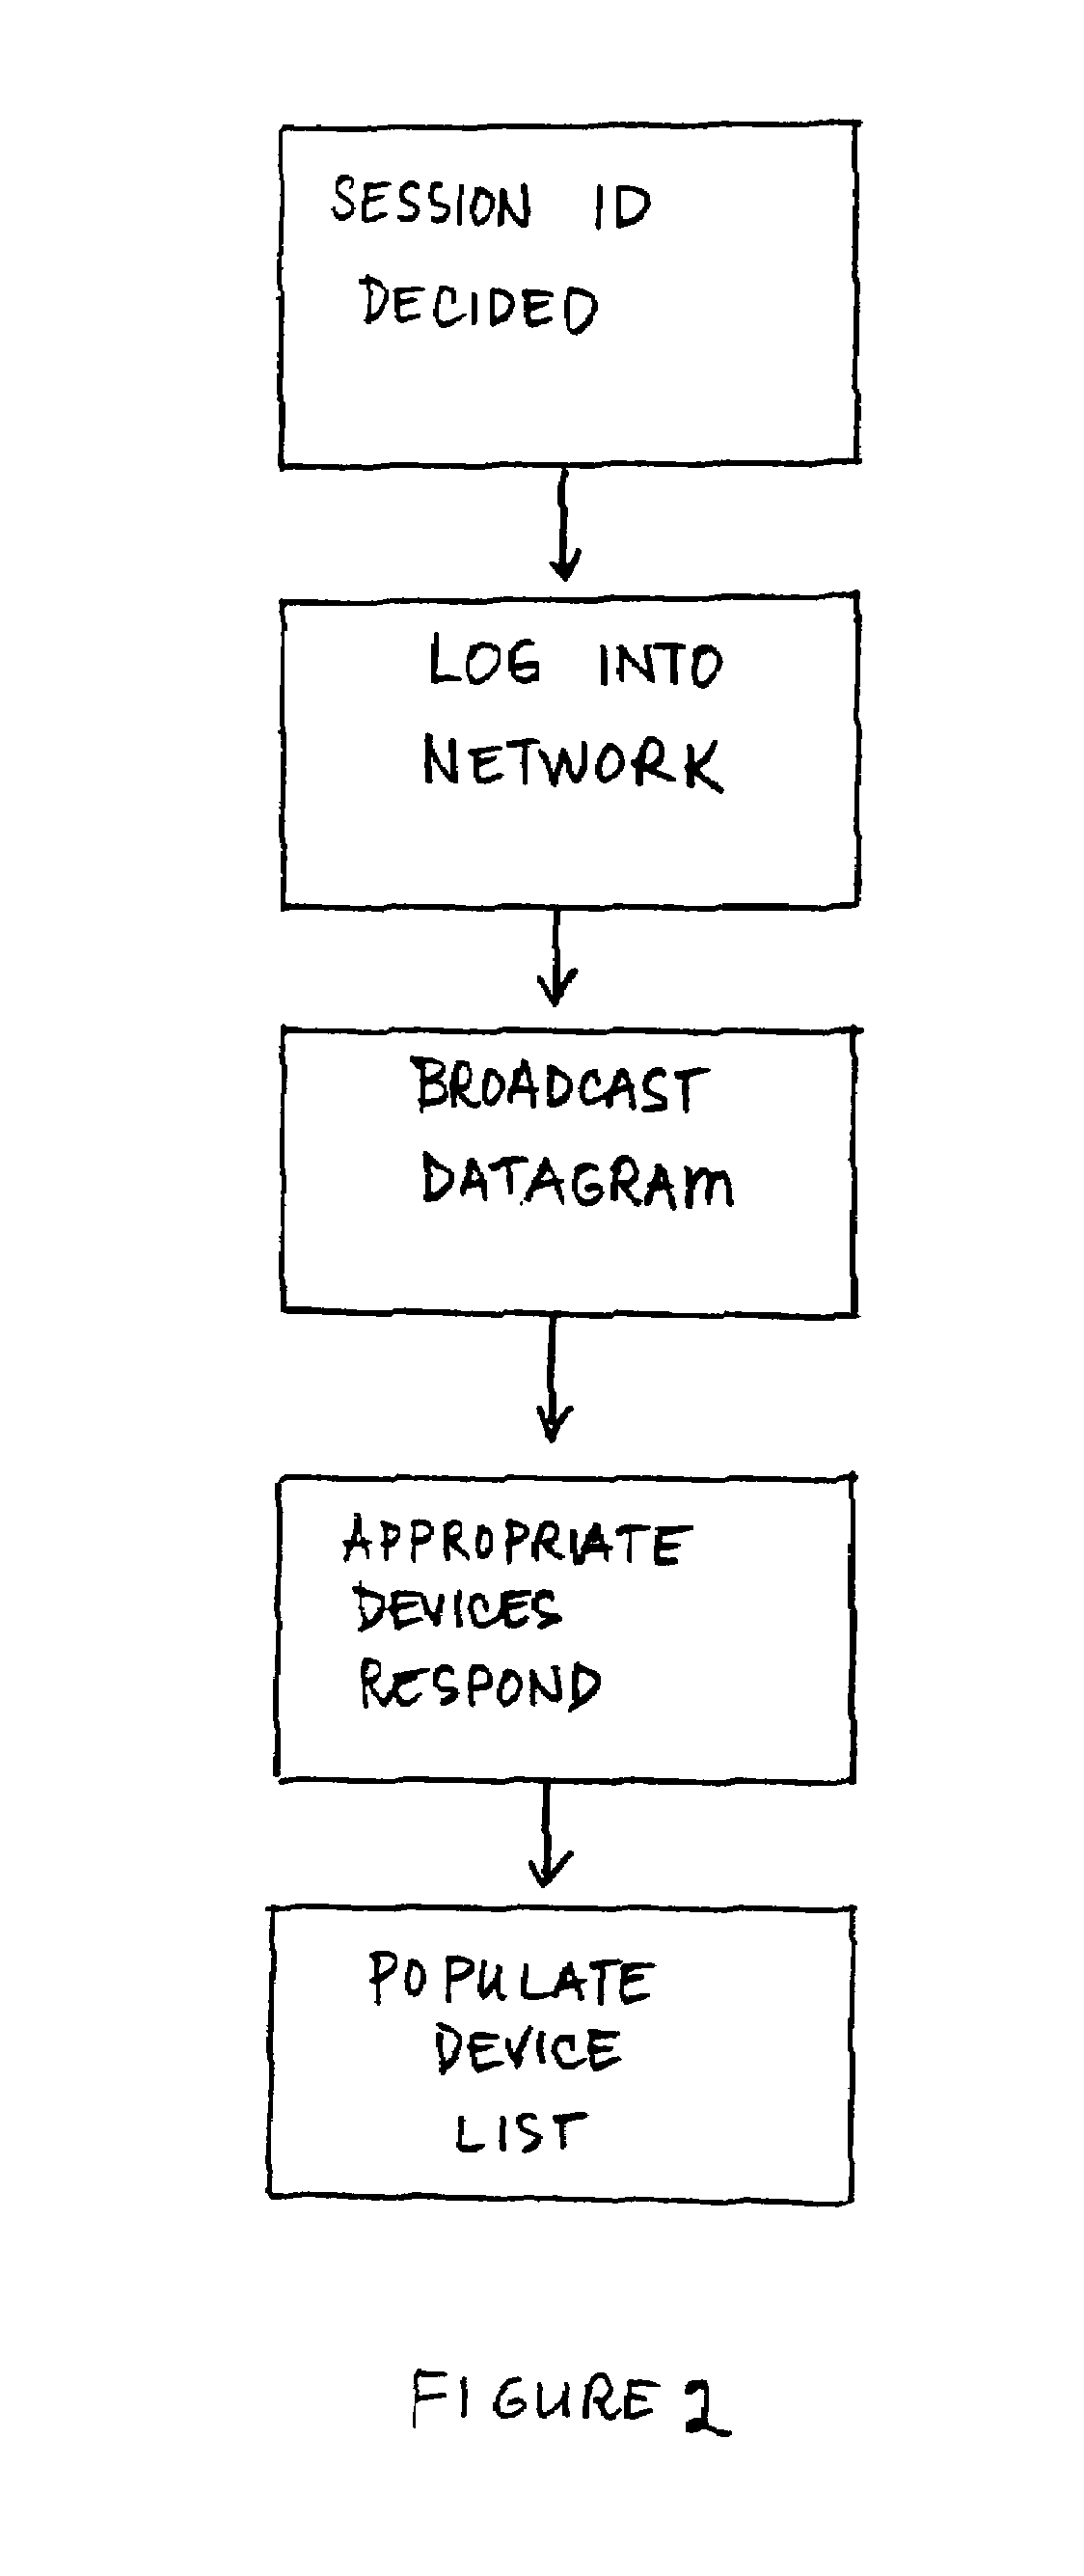 Method for discovering and discriminating devices on local collaborative networks to facilitate collaboration among users